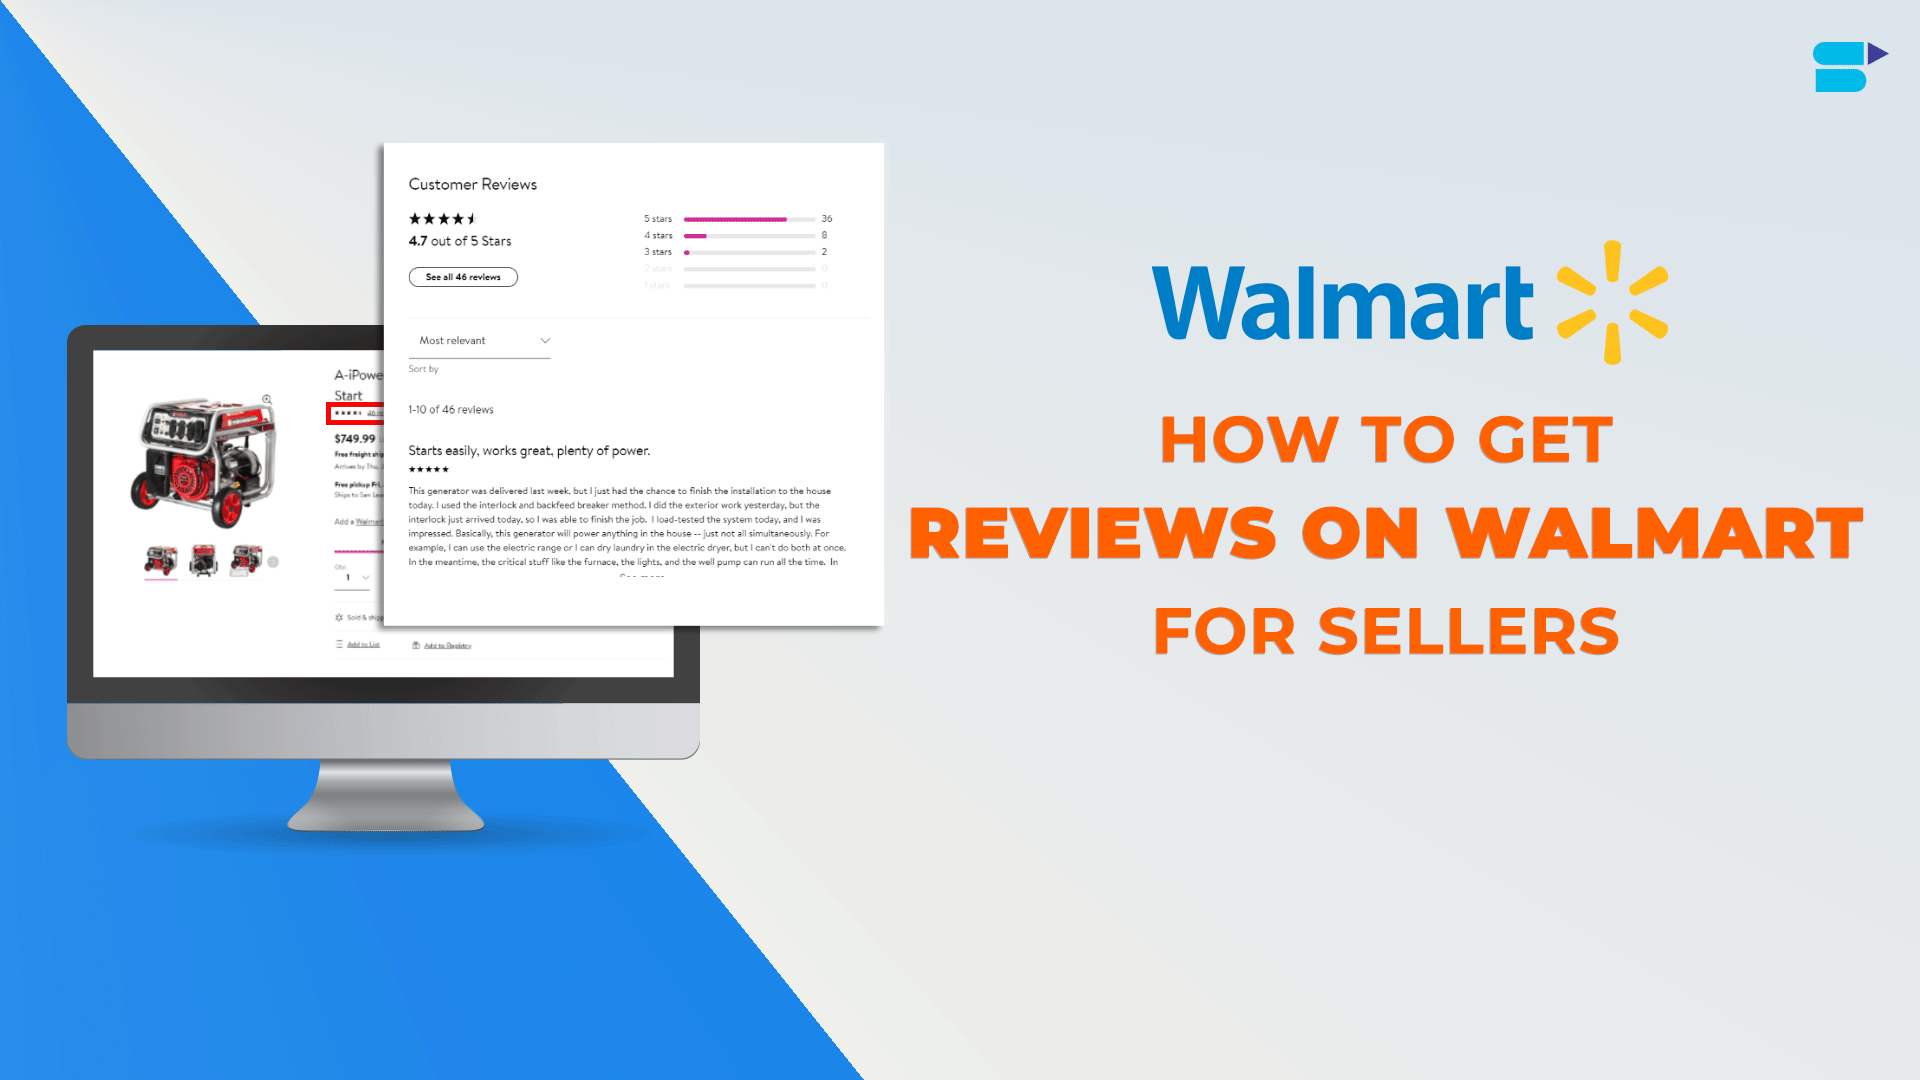 https://www.sellerapp.com/blog/wp-content/uploads/2019/01/How-to-Get-Reviews-On-Walmart-For-Sellers.png